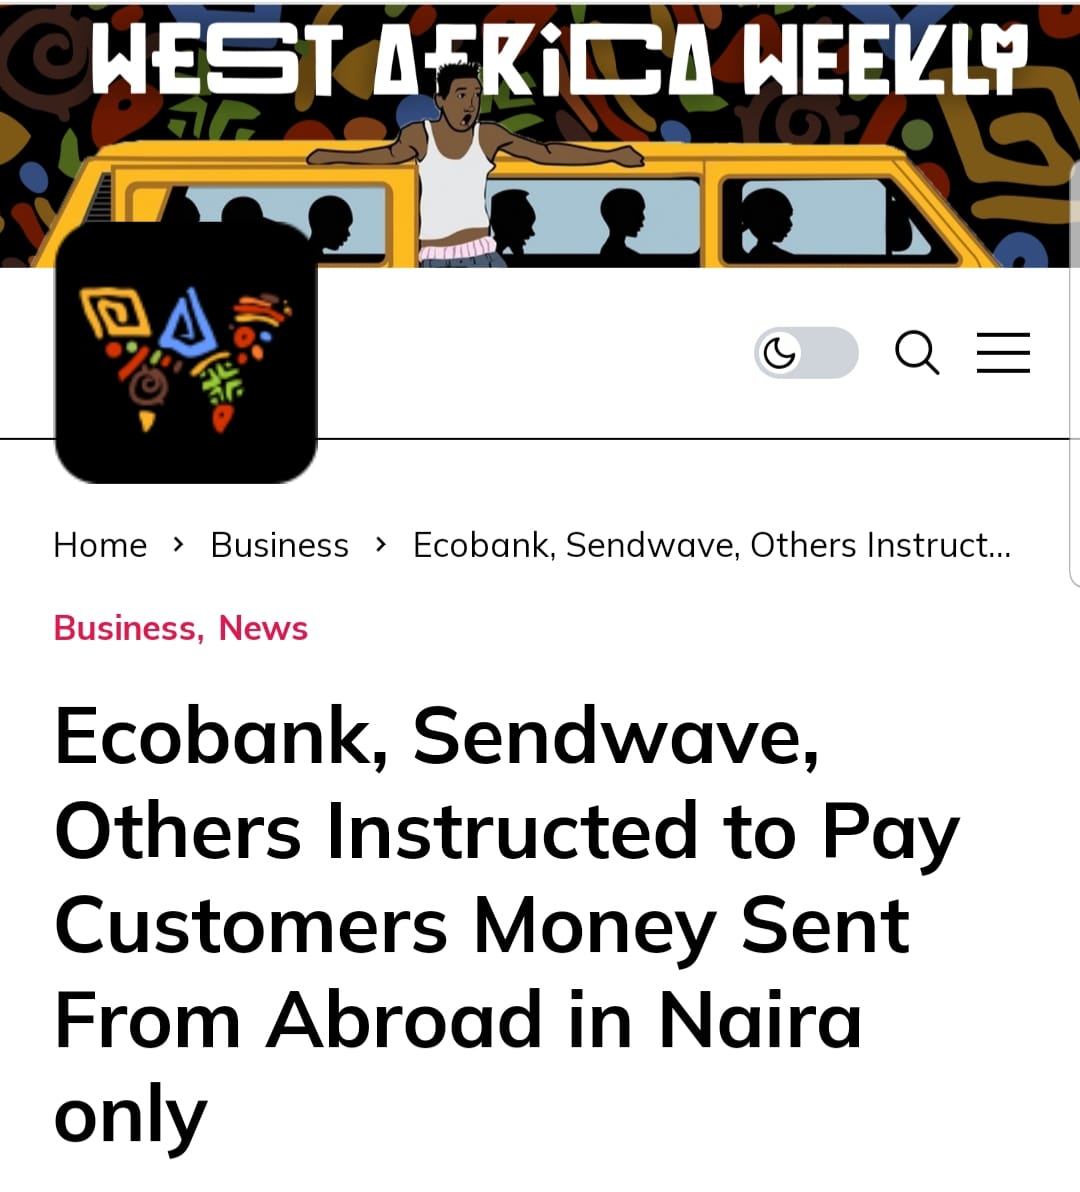 In from Nigeria, the CBN now requires Banks to give naira to customers who receive fx remittances from abroad. In essence,  if Chike in America wants to send dollars to his sister Tolu in Nigeria, so that she can withdraw the dollars and exchange with mallam/black market, it is